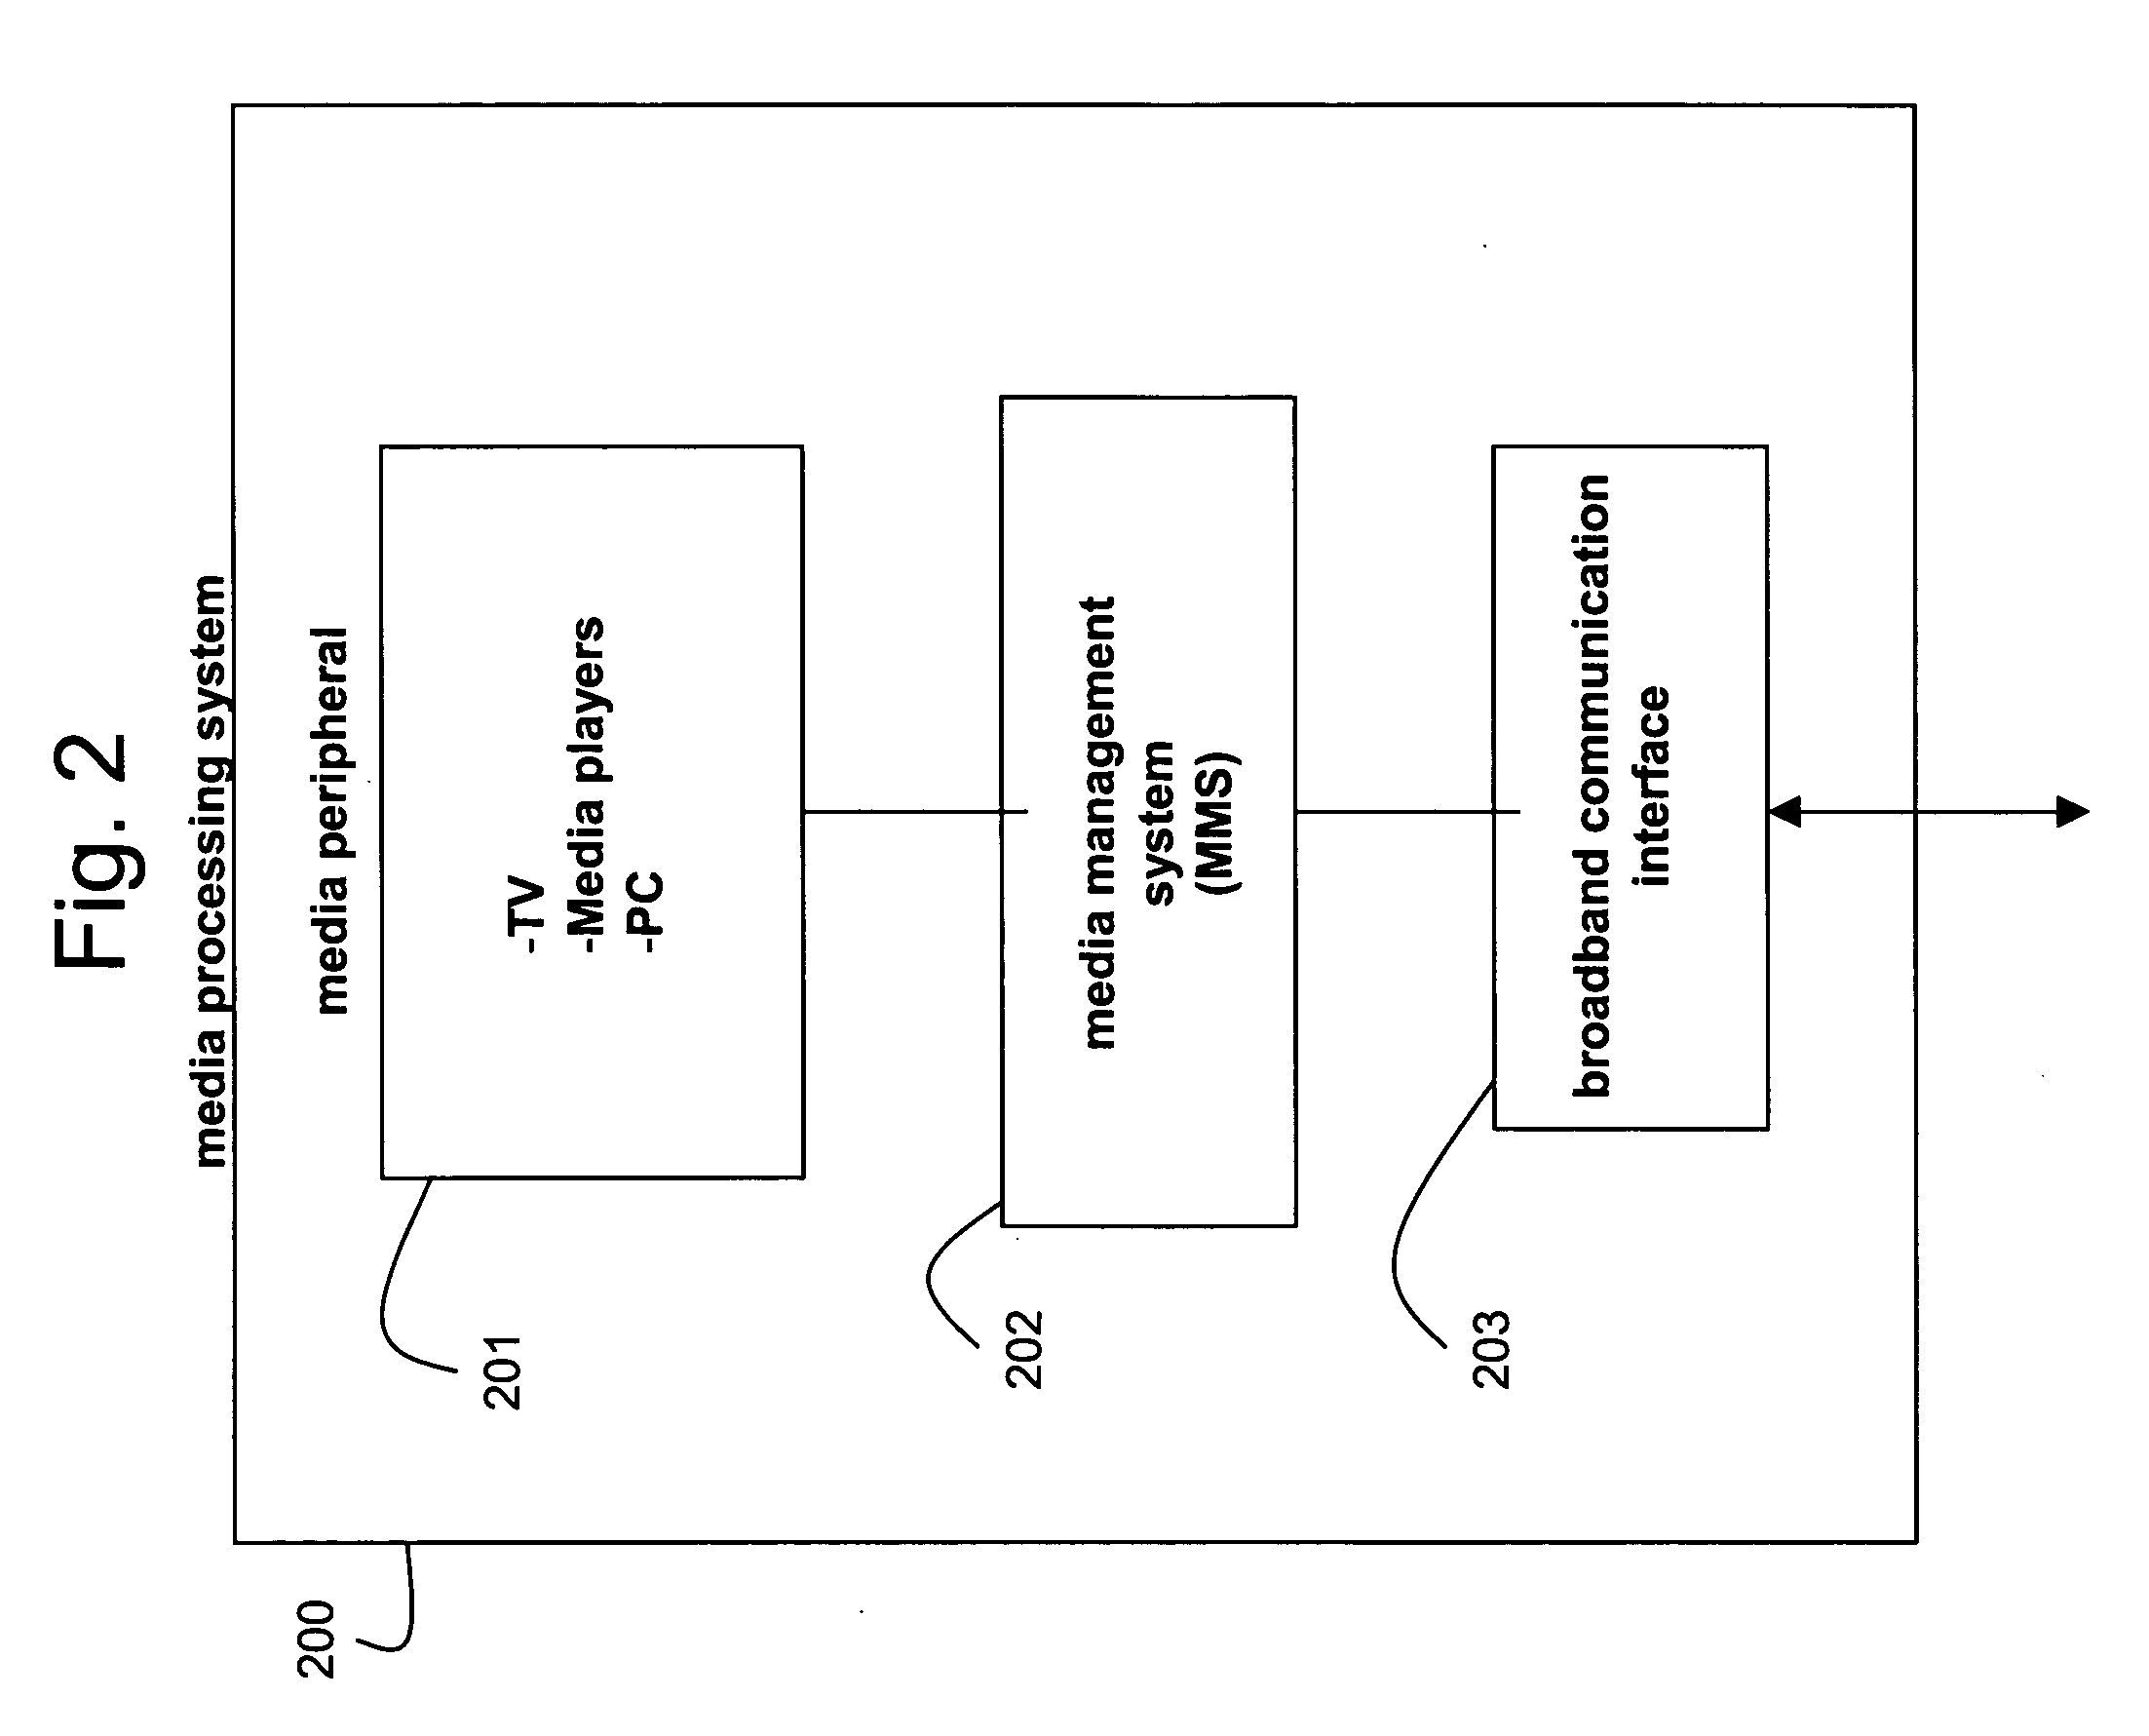 System, method, and apparatus for secure sharing of multimedia content across several electronic devices